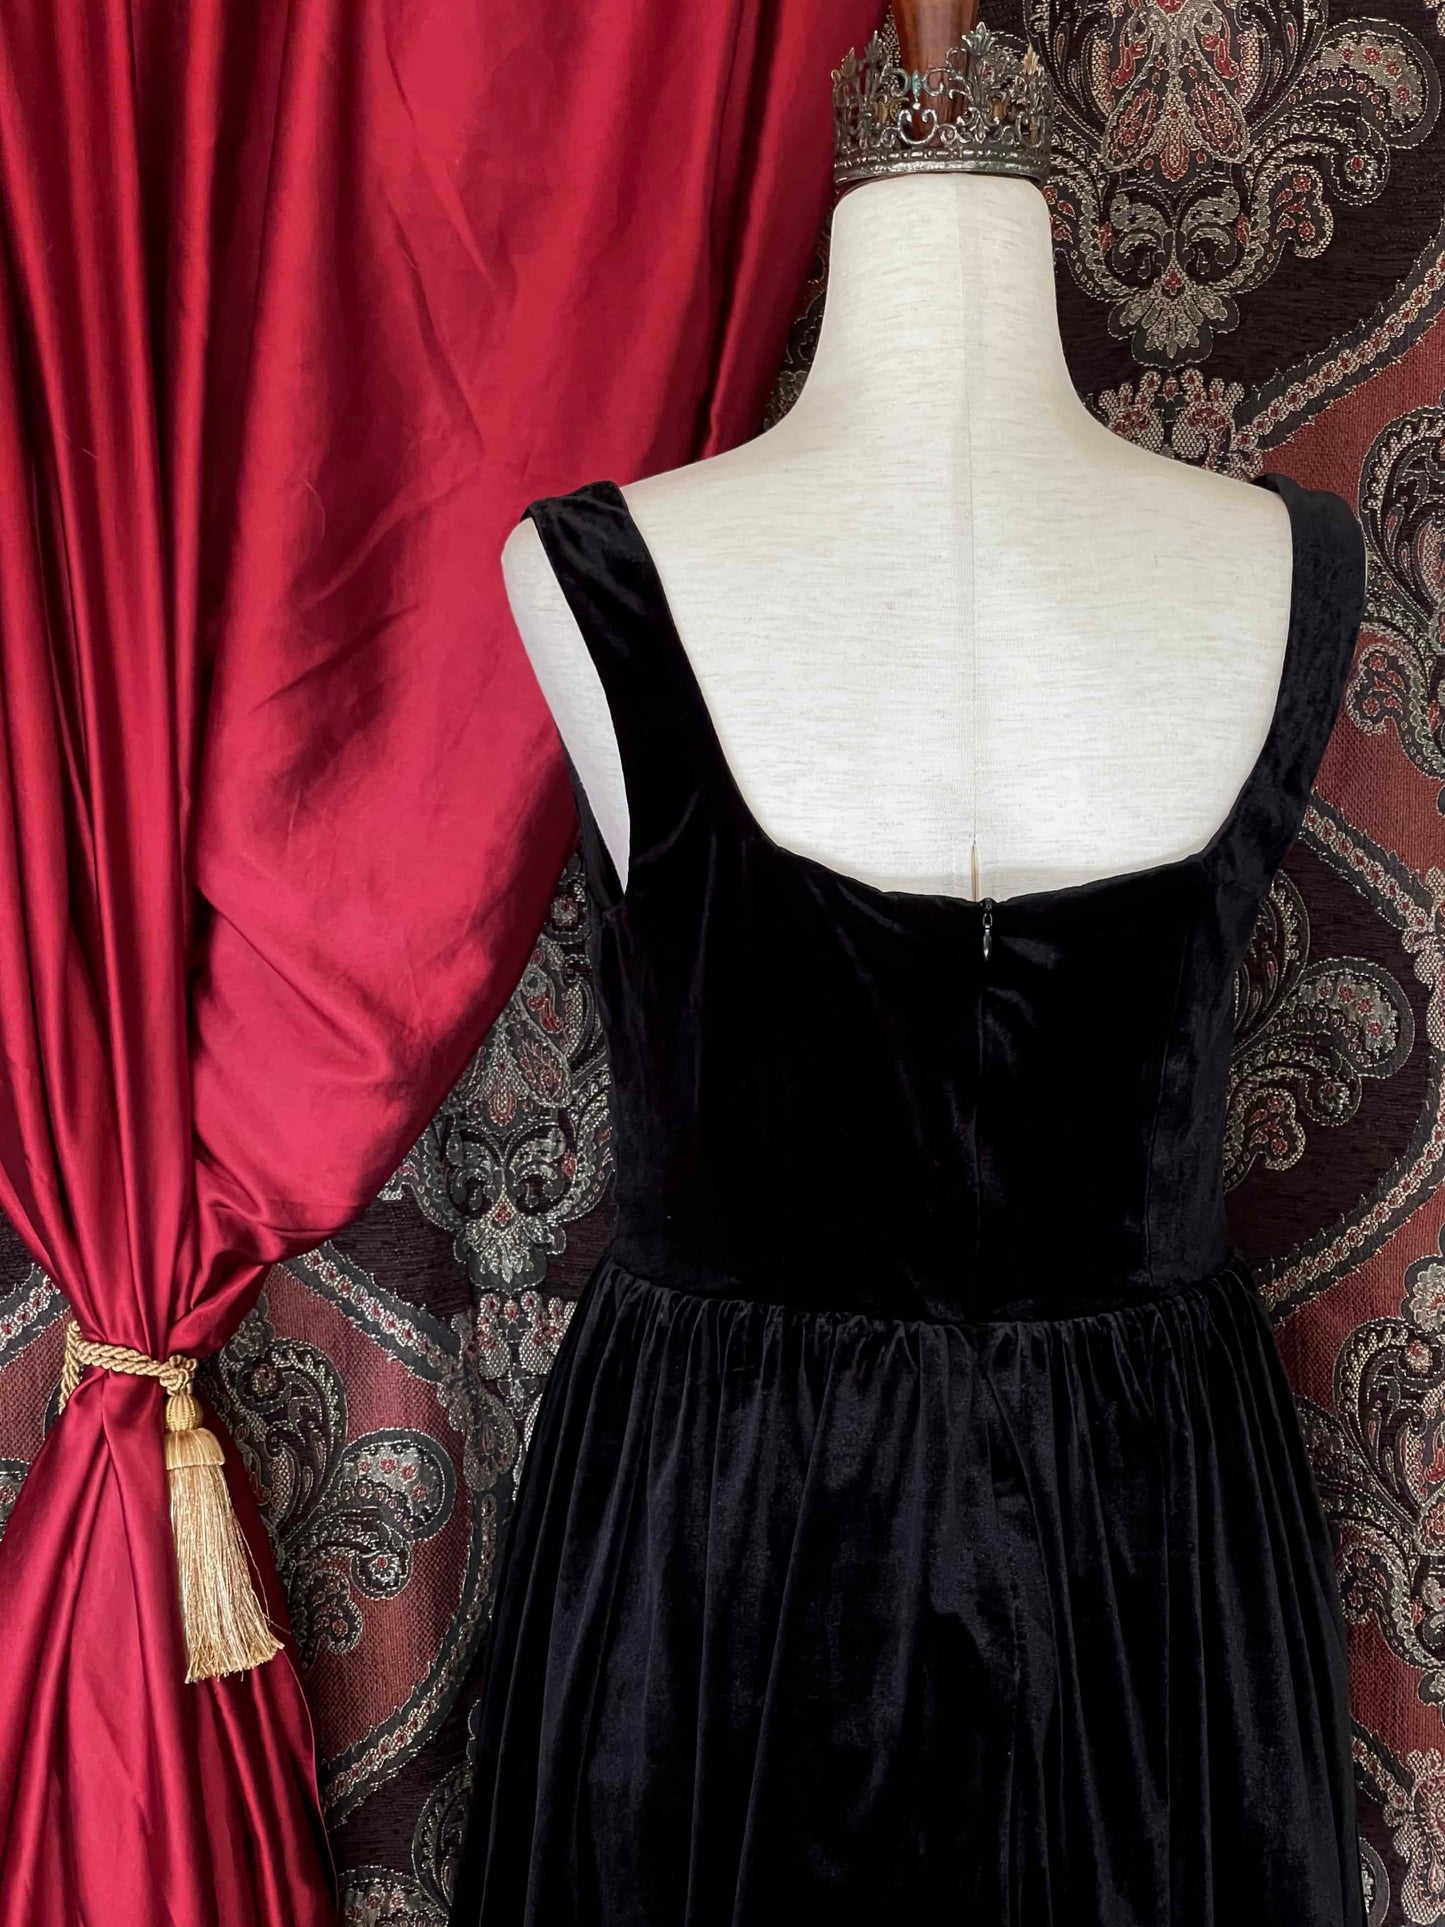 A renaissance and tudor era inspired black velvet mini dress with structured corset style bodice, pictured on a mannequin in front of a historical background.